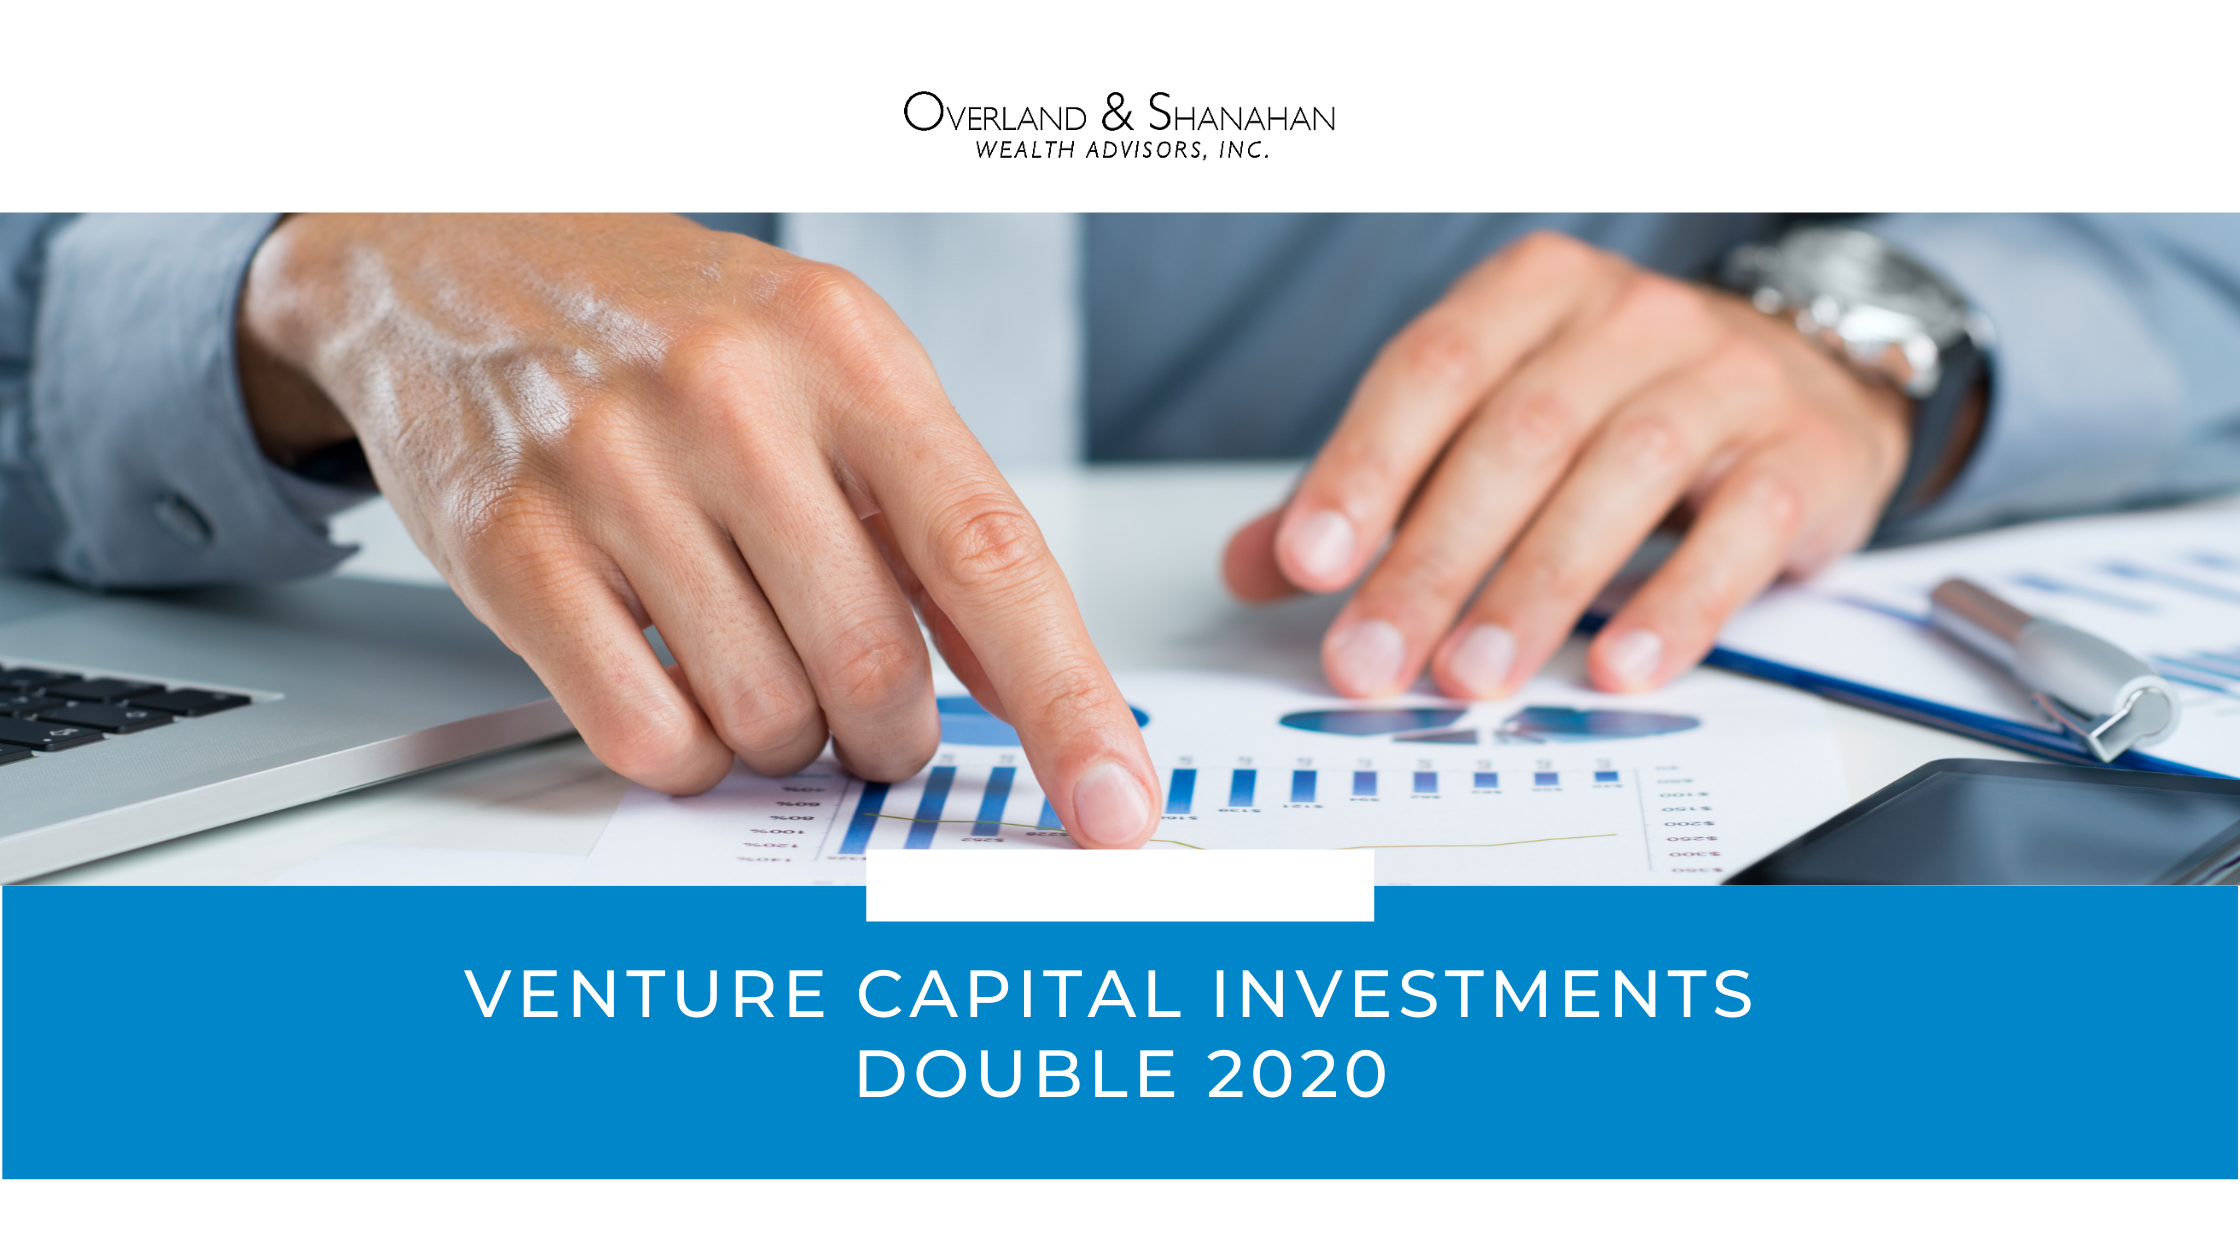 Venture Capital Investments Already Double 2020